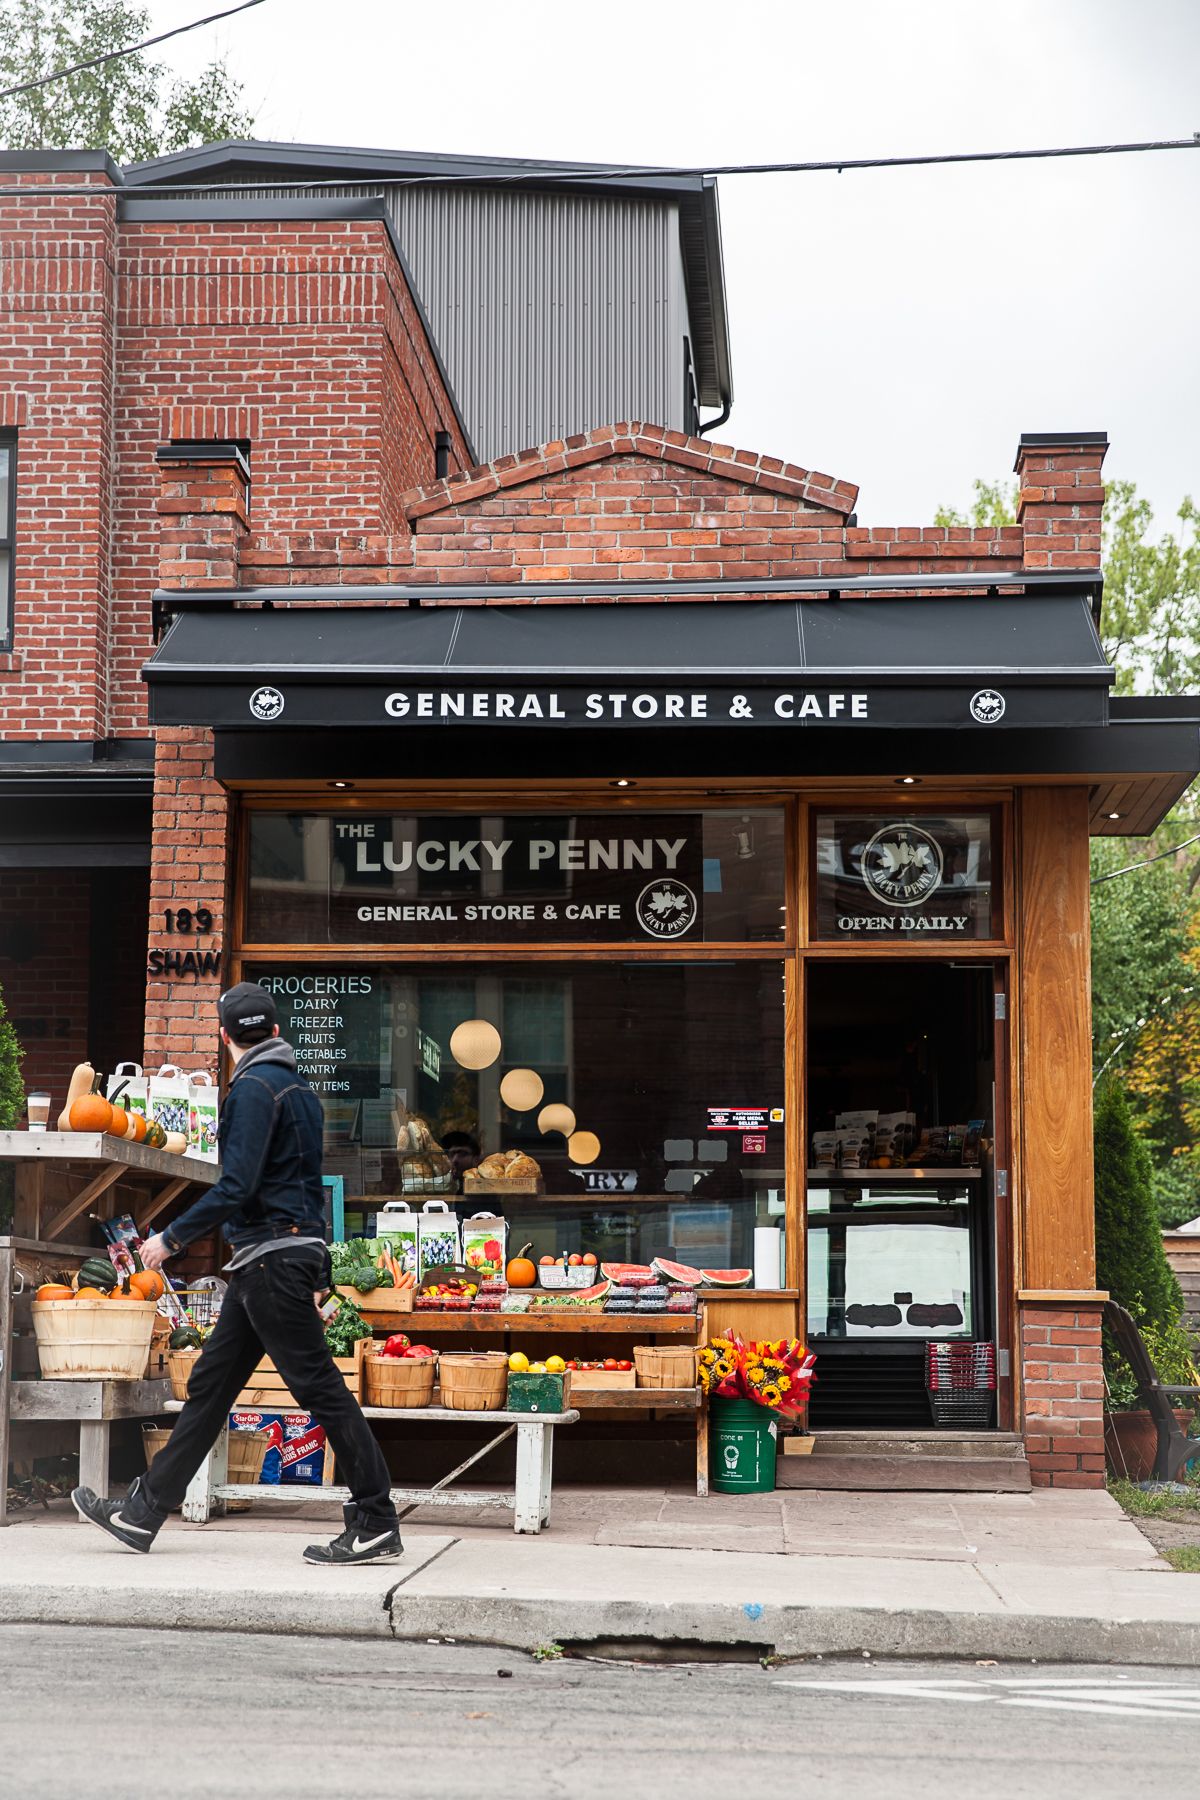 The Lucky Penny General Store and Cafe